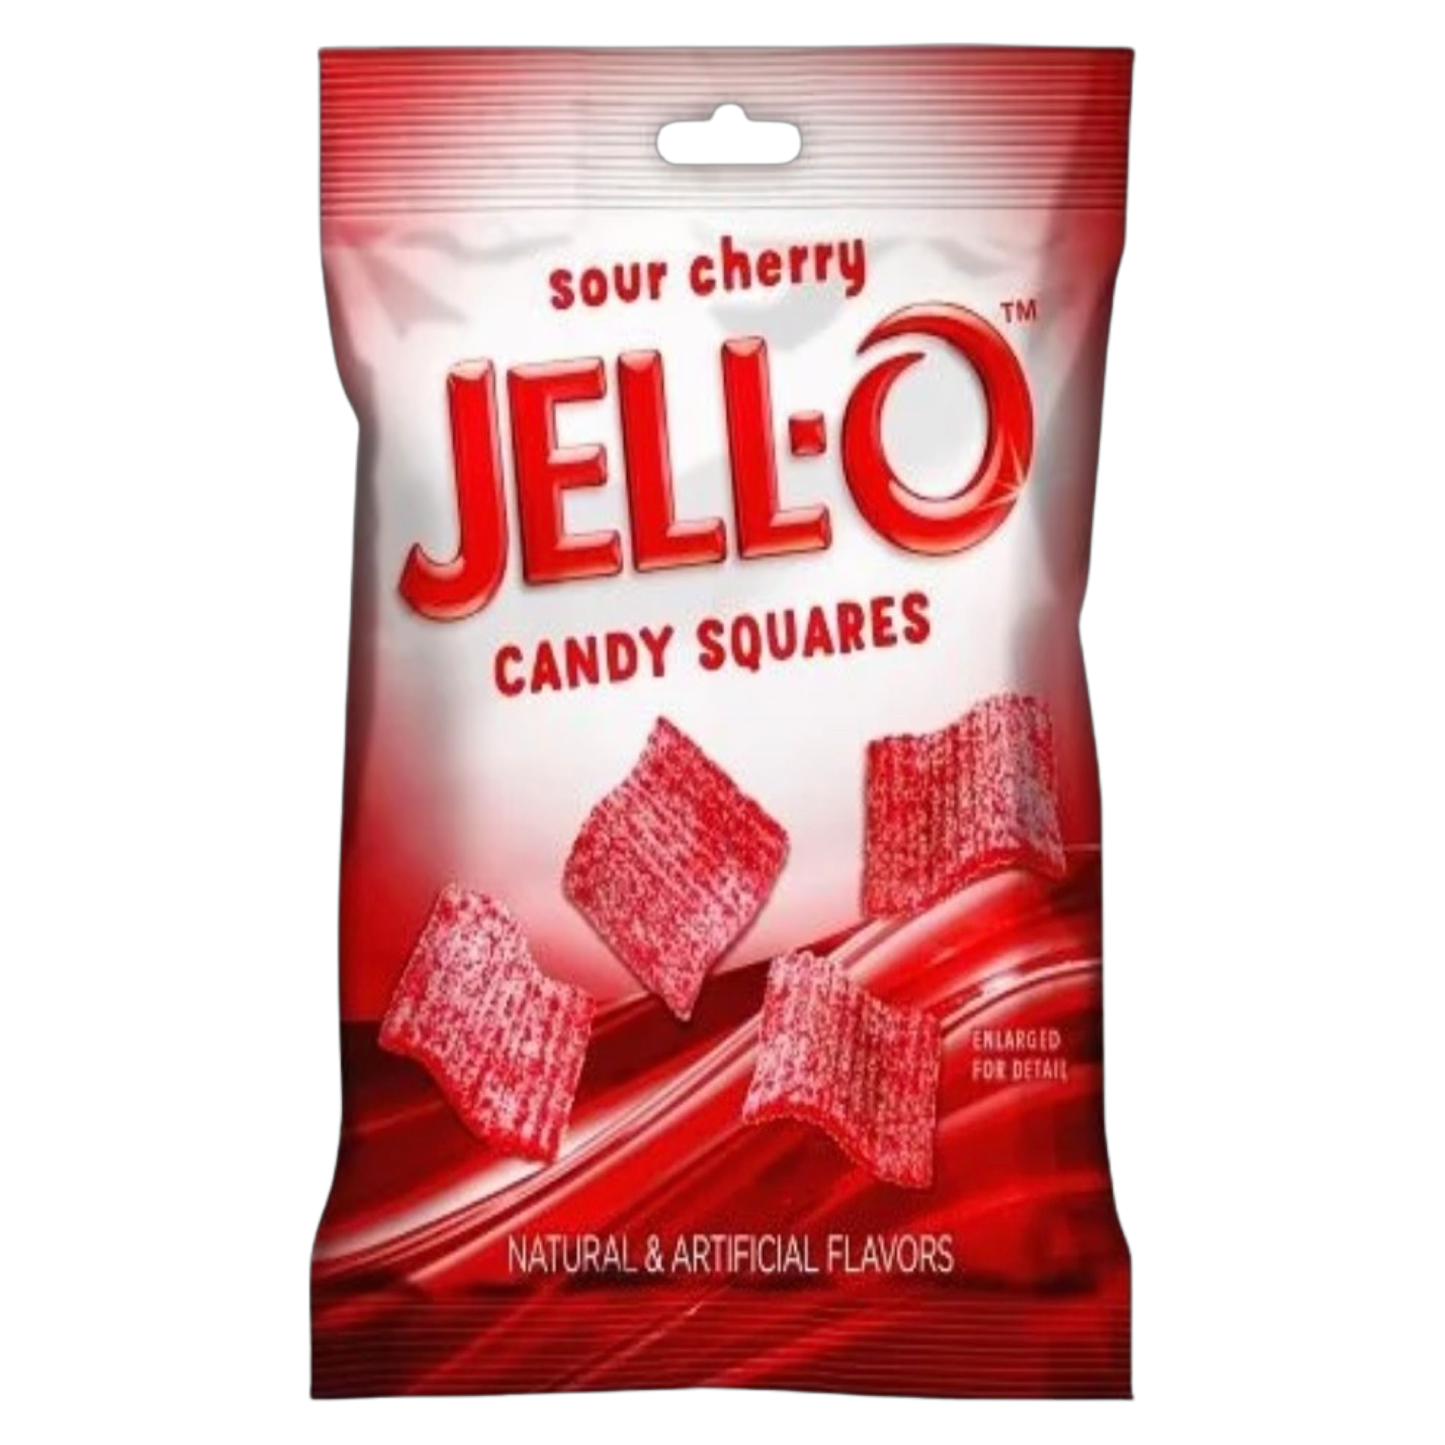 JELL-O Sour Cherry Candy Squares